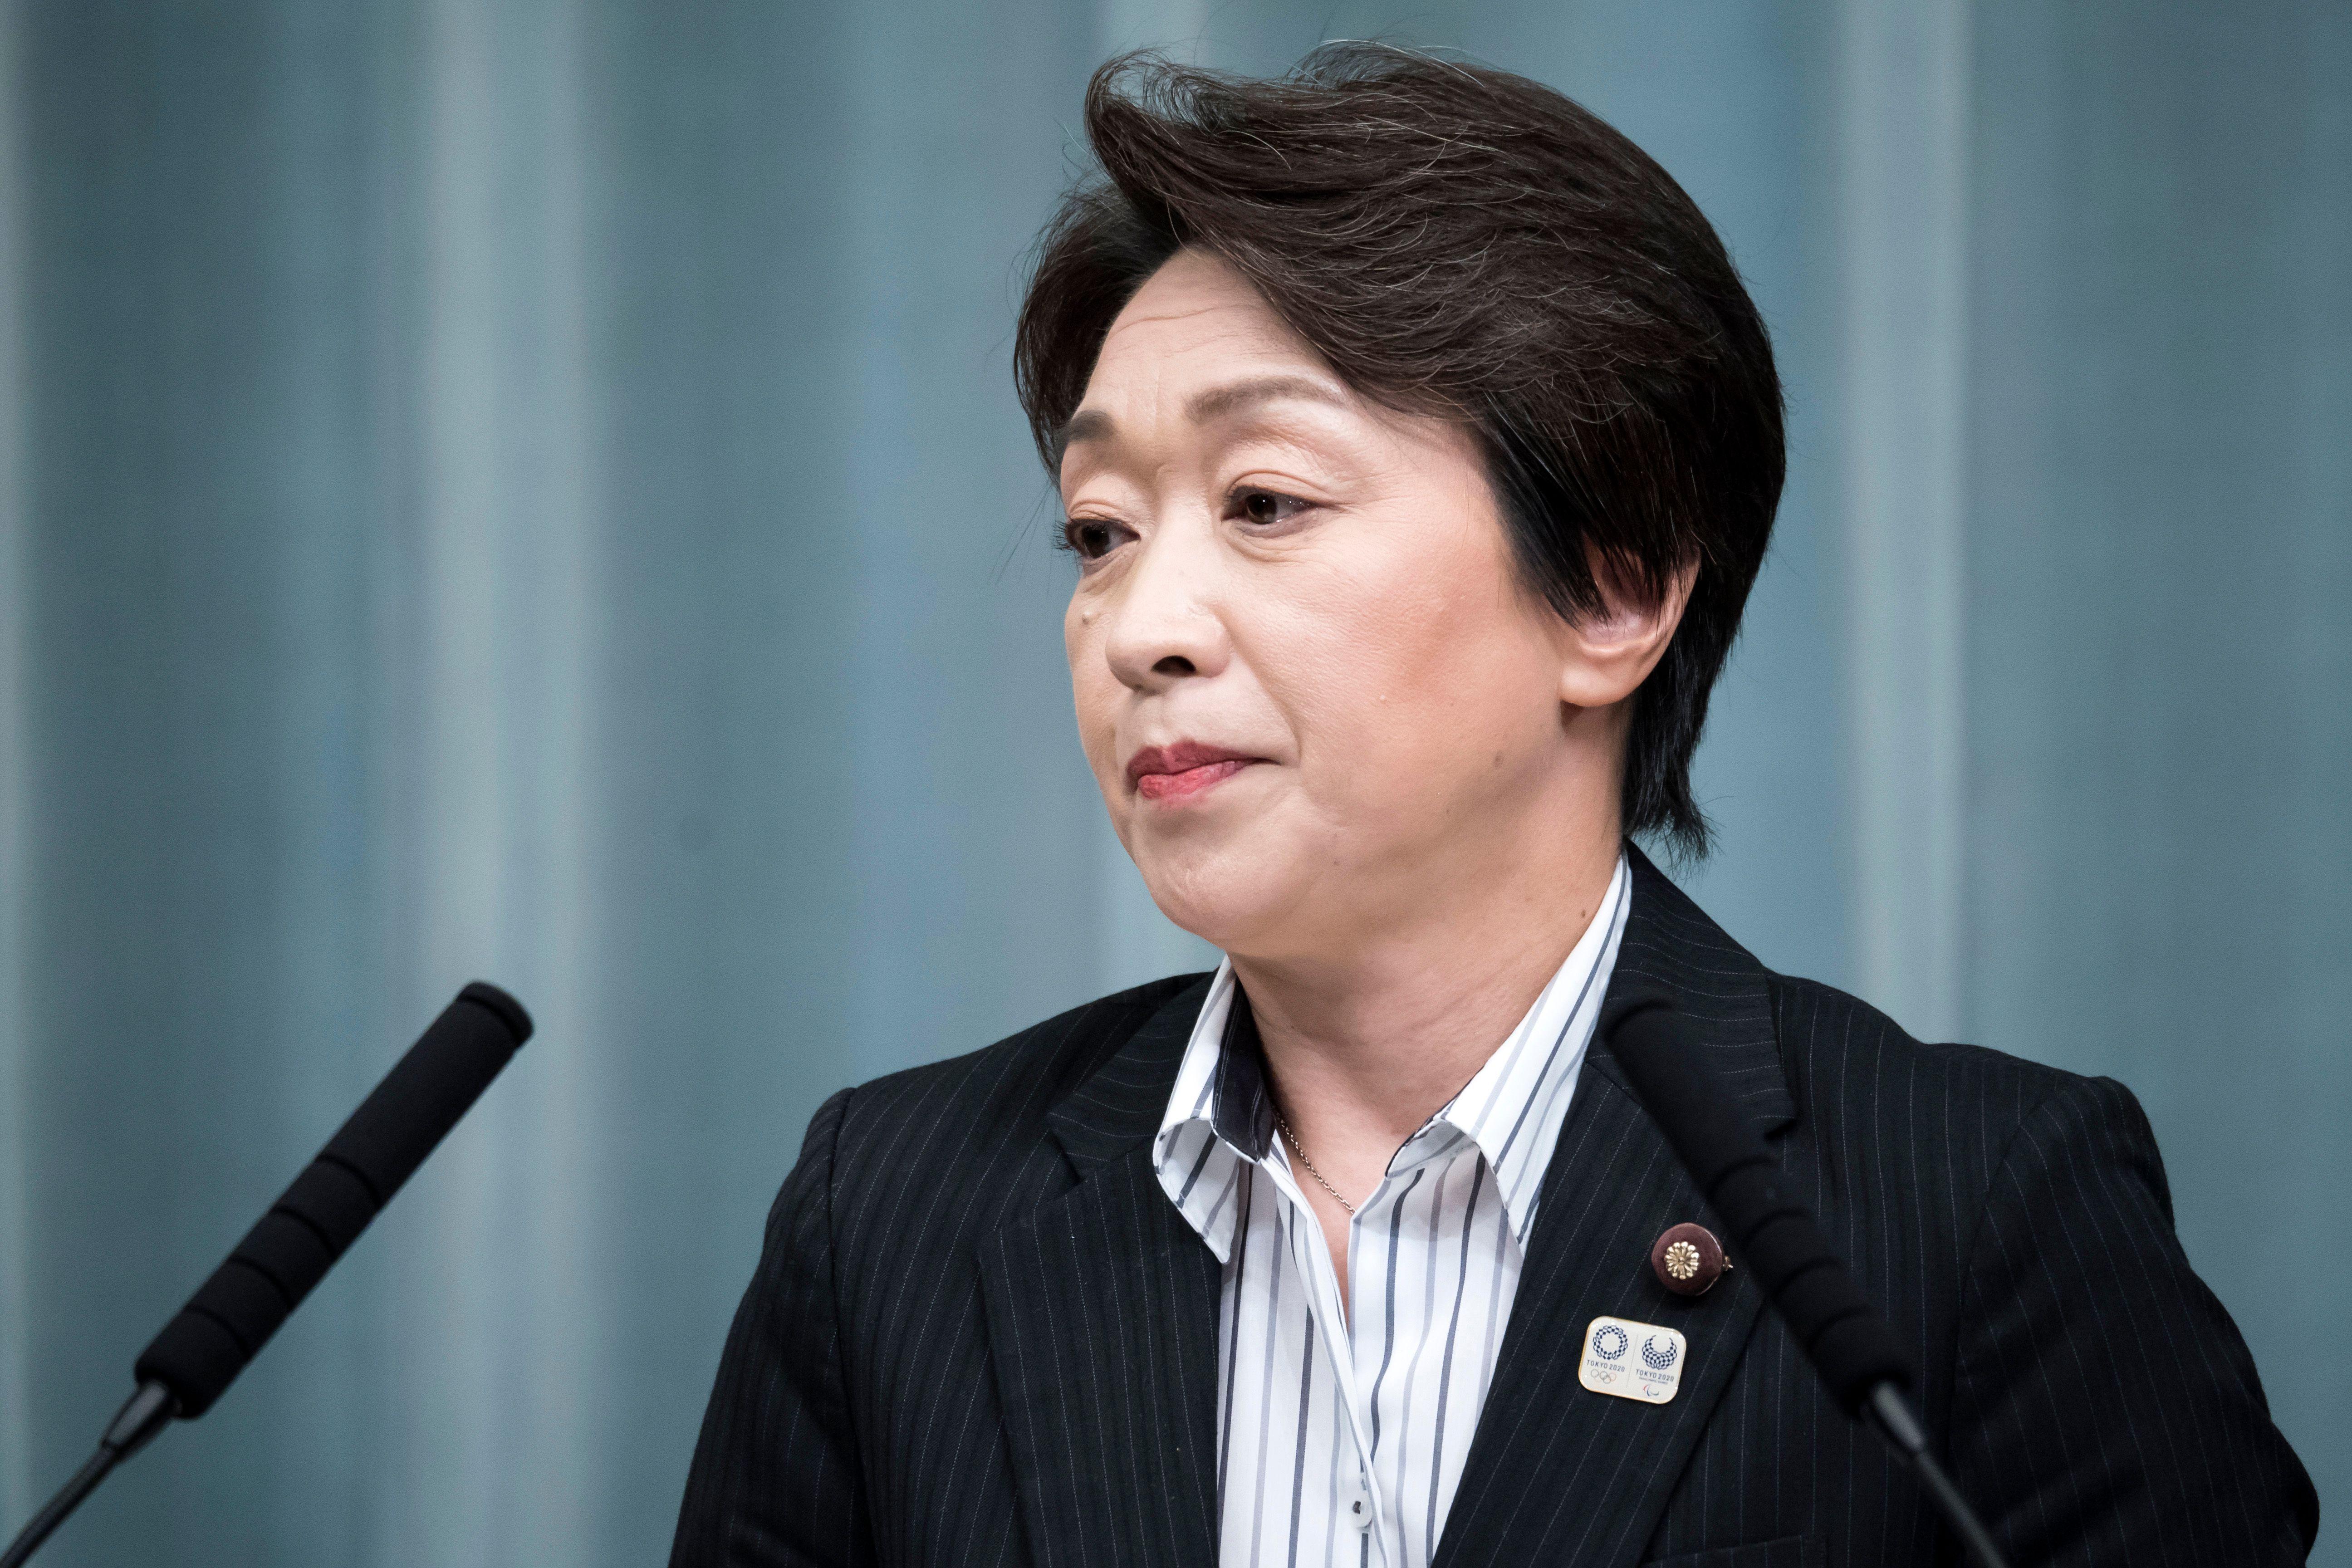 Seven-time Olympian Seiko Hashimoto replaces Yoshiro Mori, the former Japanese prime minister forced to resign over sexist co